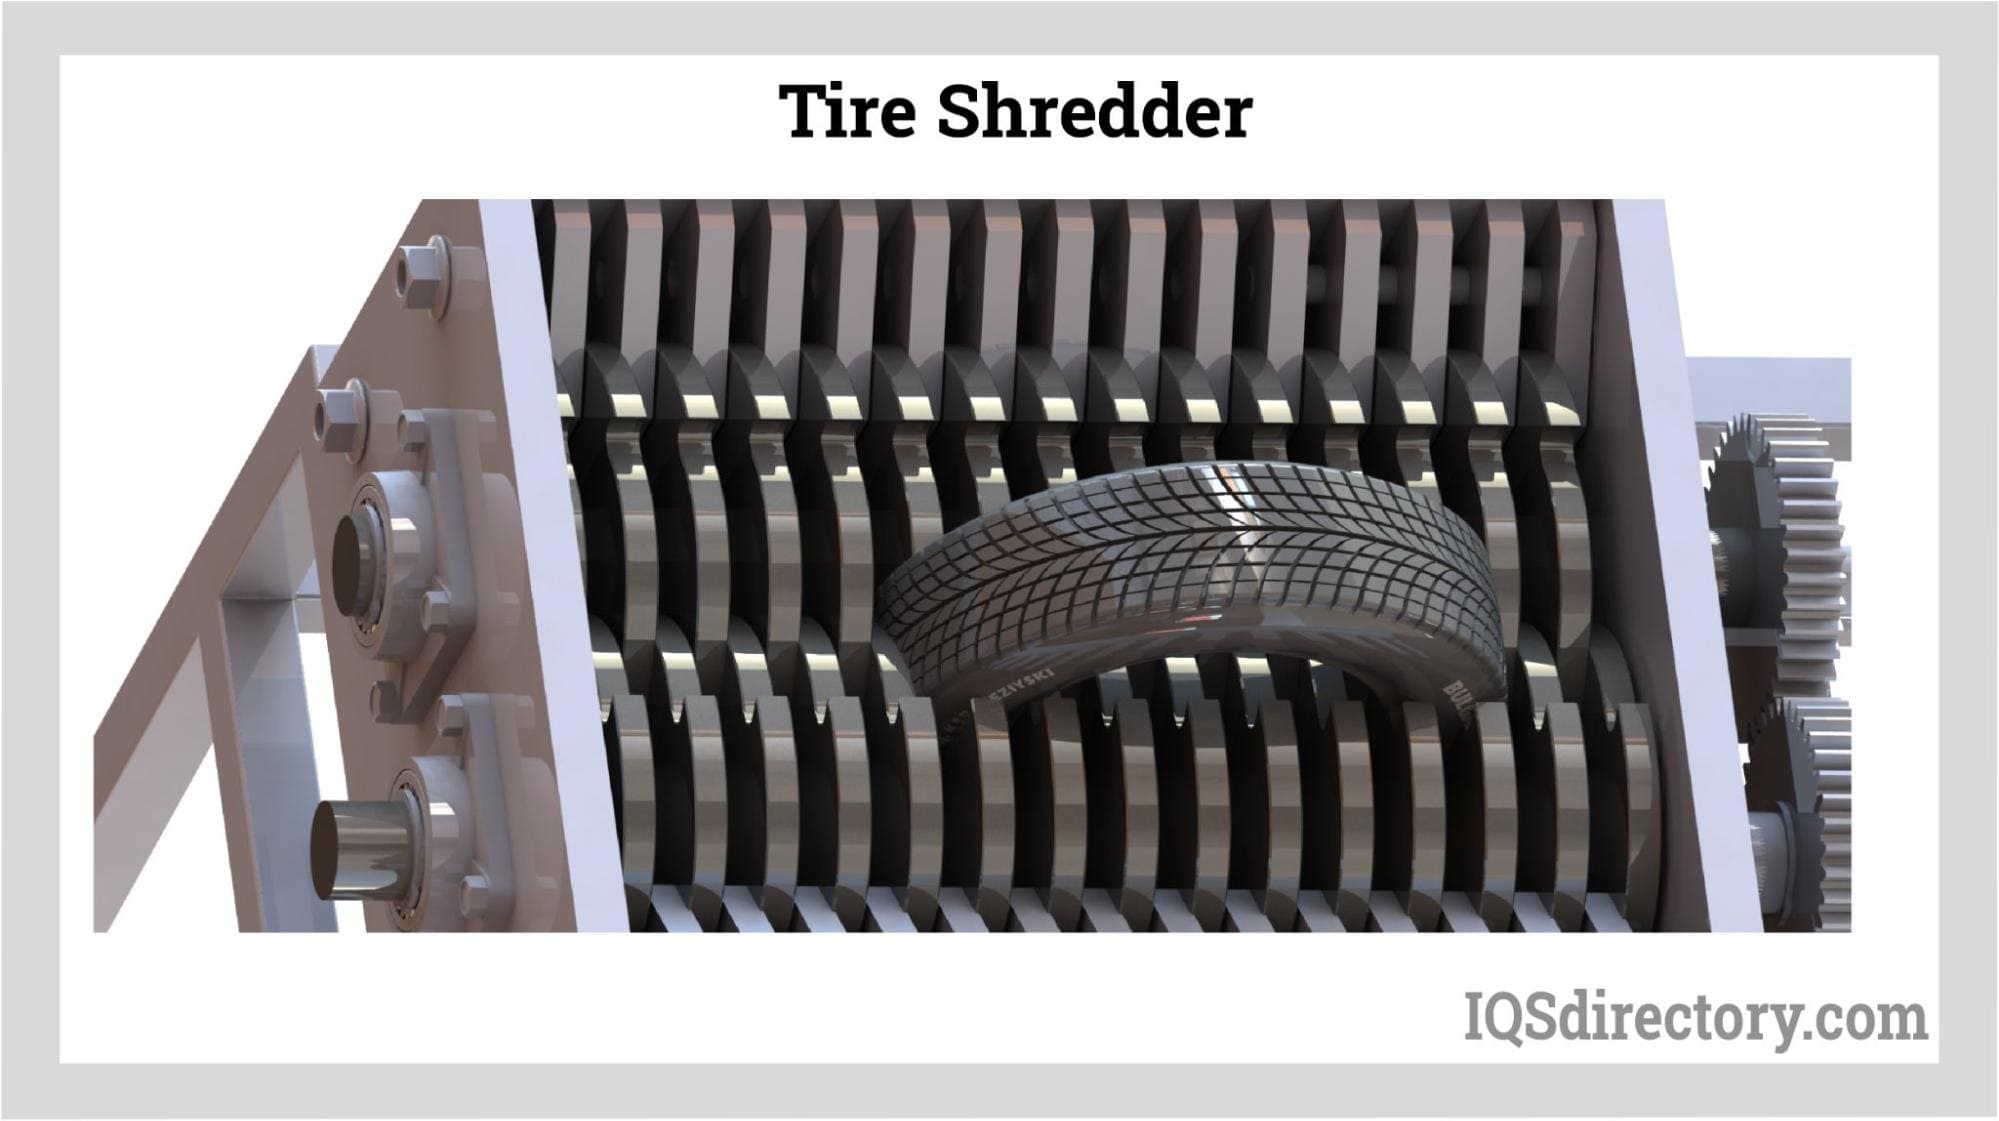 Metal Shredders: Types, Uses, Features and Benefits